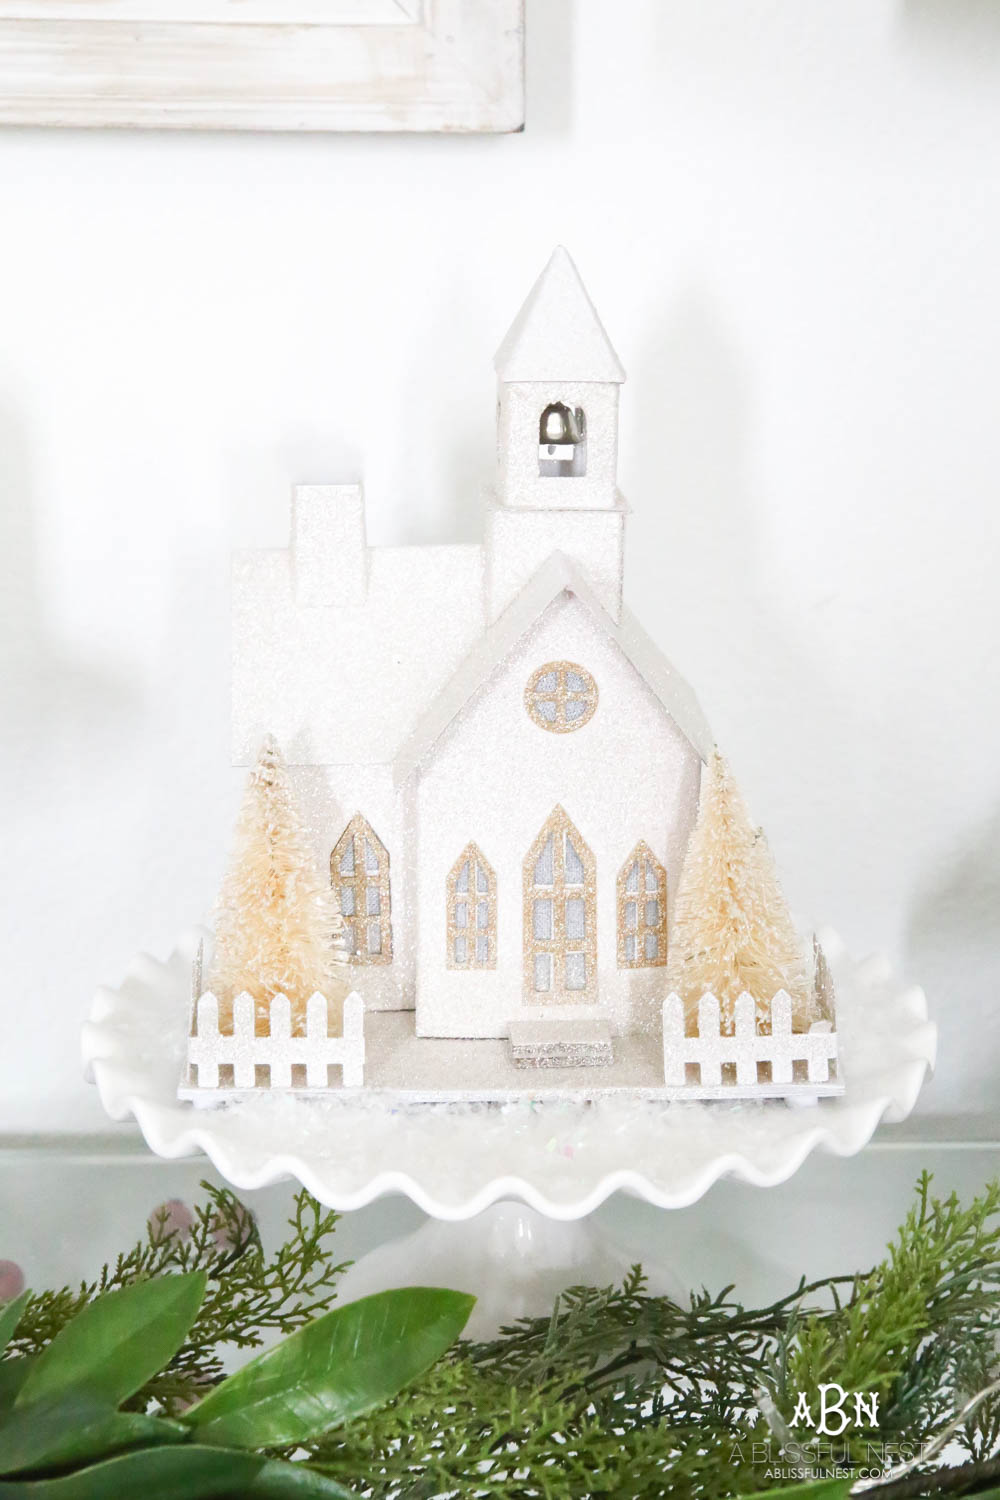 Use cake plates to add height to your display. I love the collection of candles and lighted glitter holiday houses sprinkled with snow for a beautiful simple classic Christmas look. #christmasentryway #christmasentry #christmasentrydecor #christmasentrywayideas #christmashometour